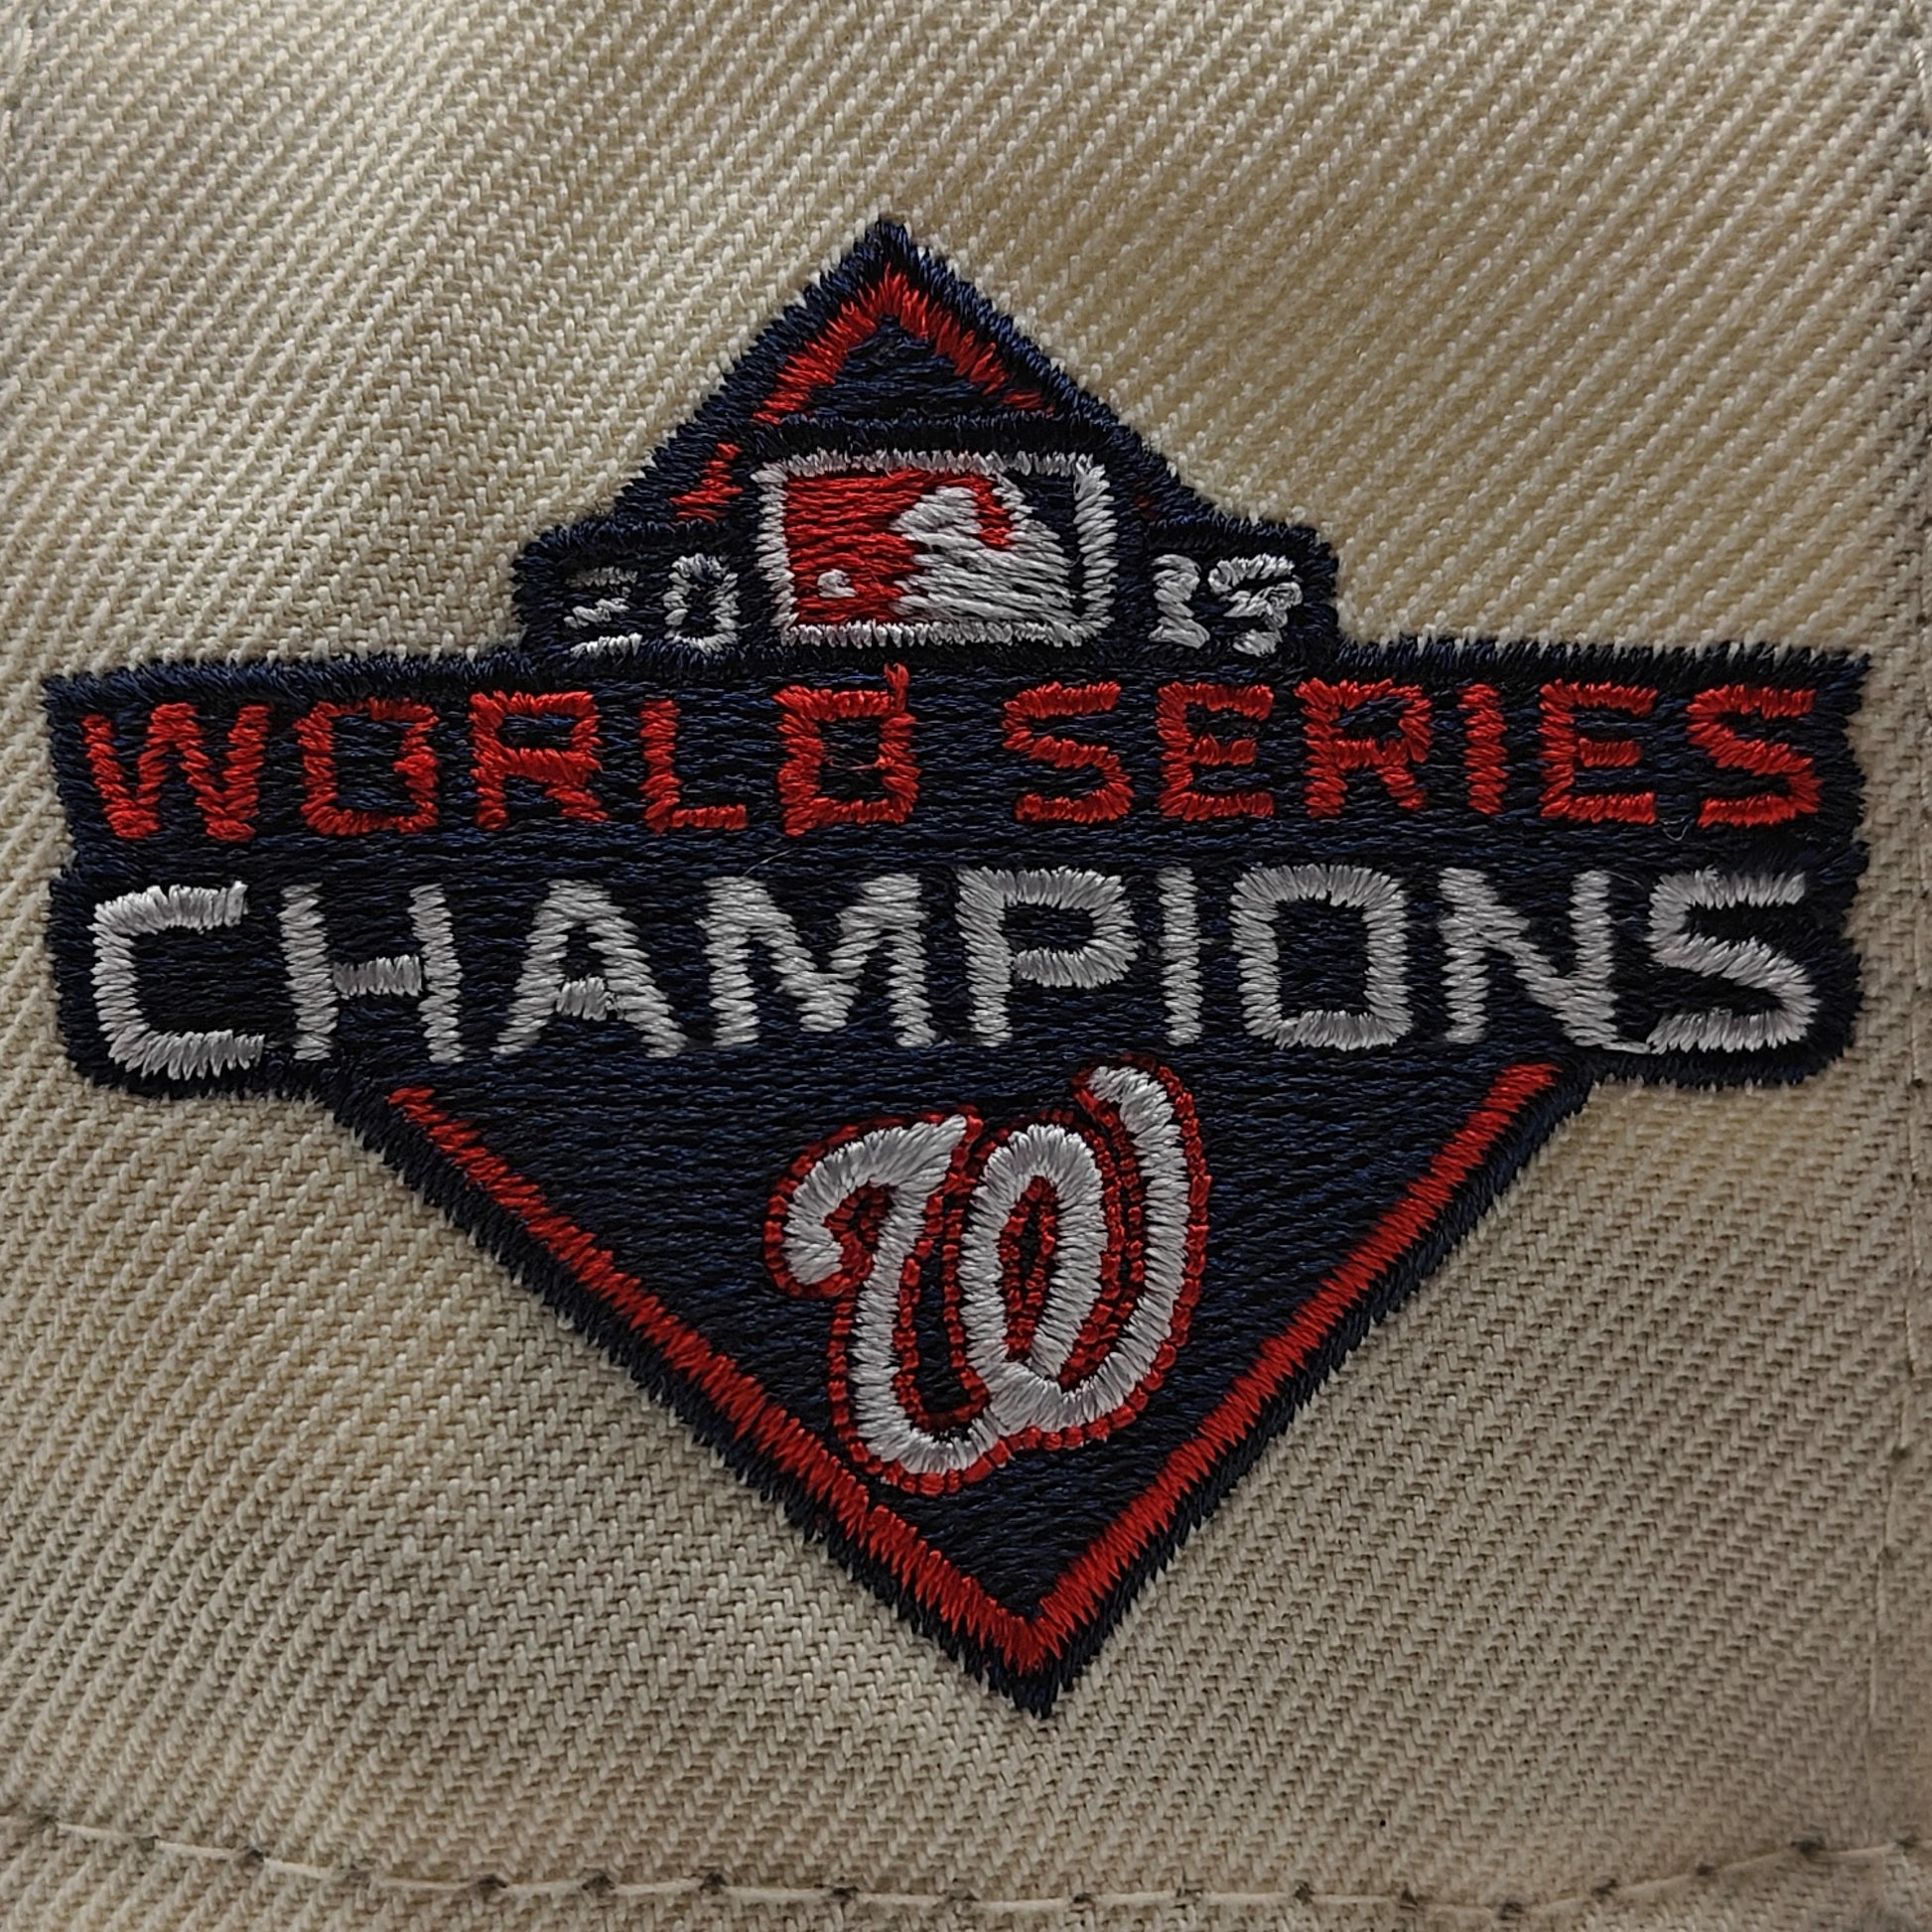 New Era 59FIFTY Washington Nationals 2019 World Series Champions Patch Fitted Hat 7 1/4